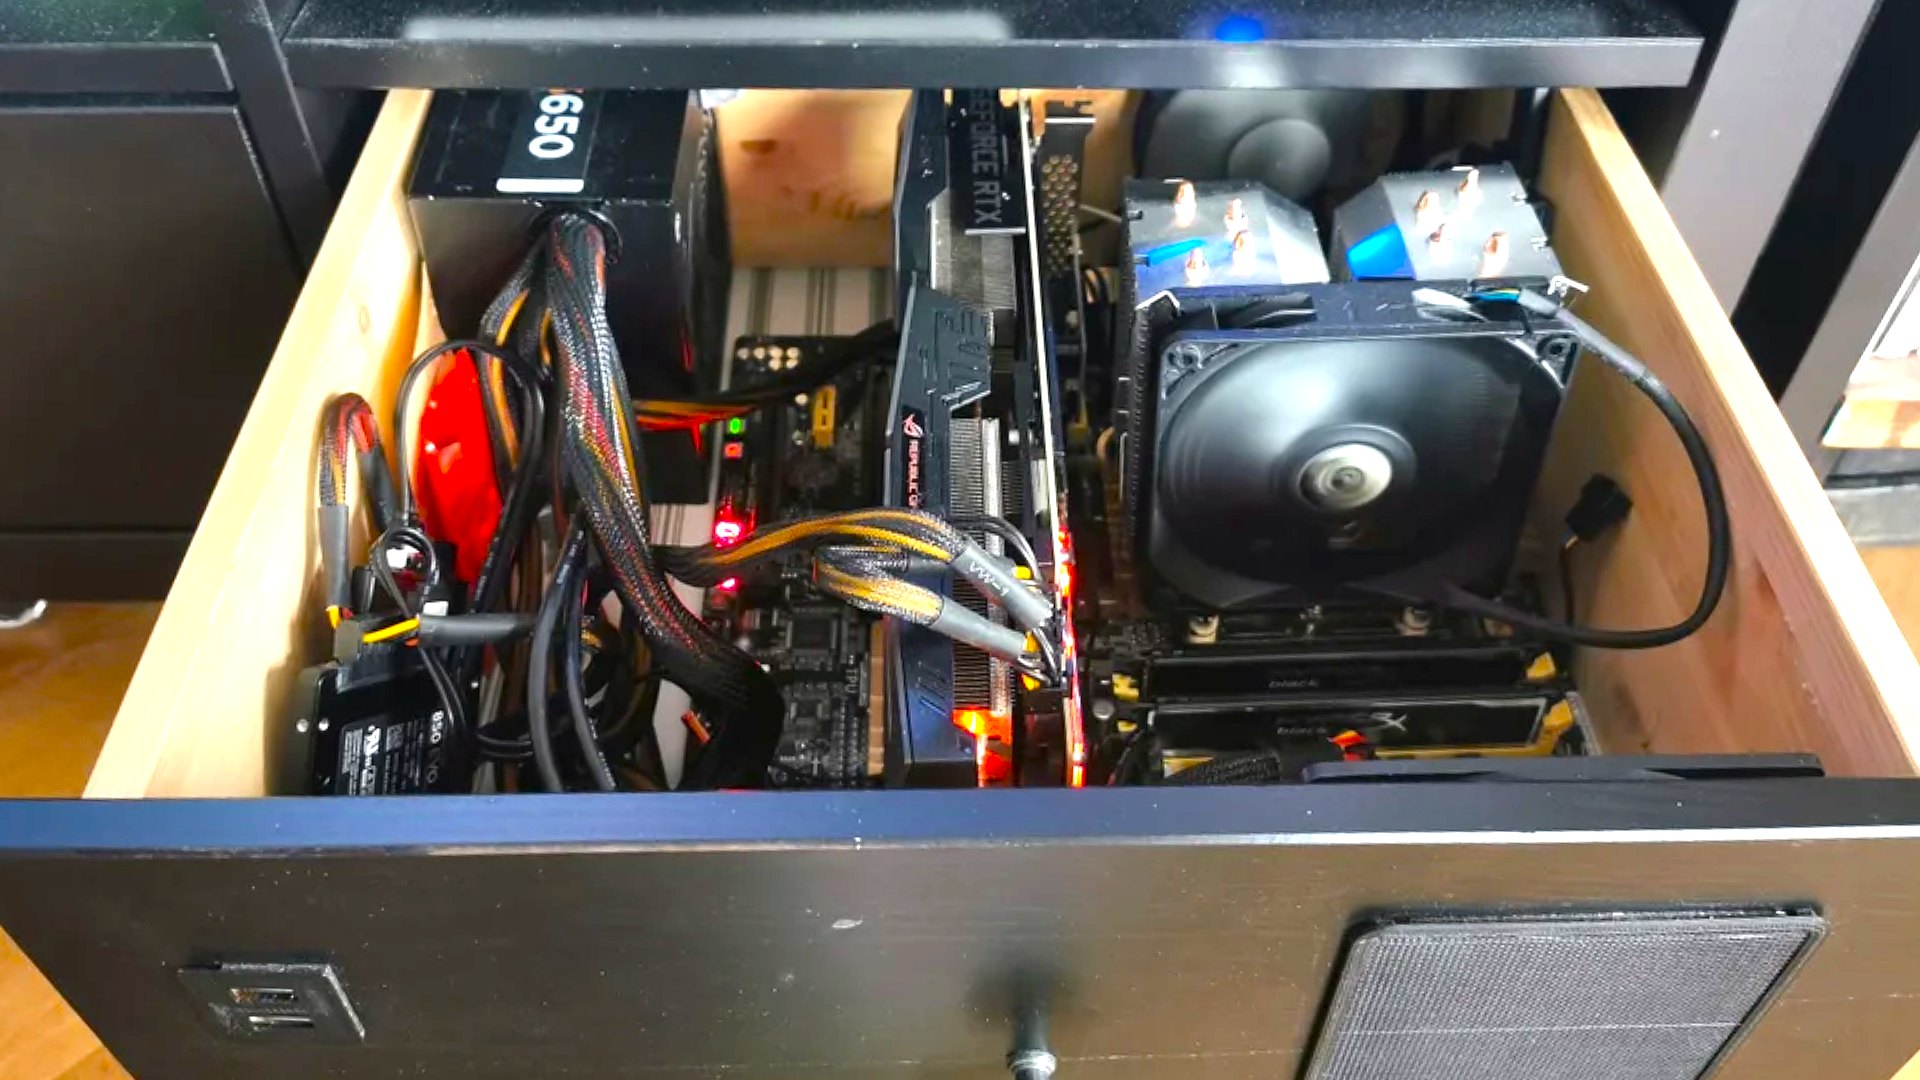 Image of gaming PC installed in a desk drawer